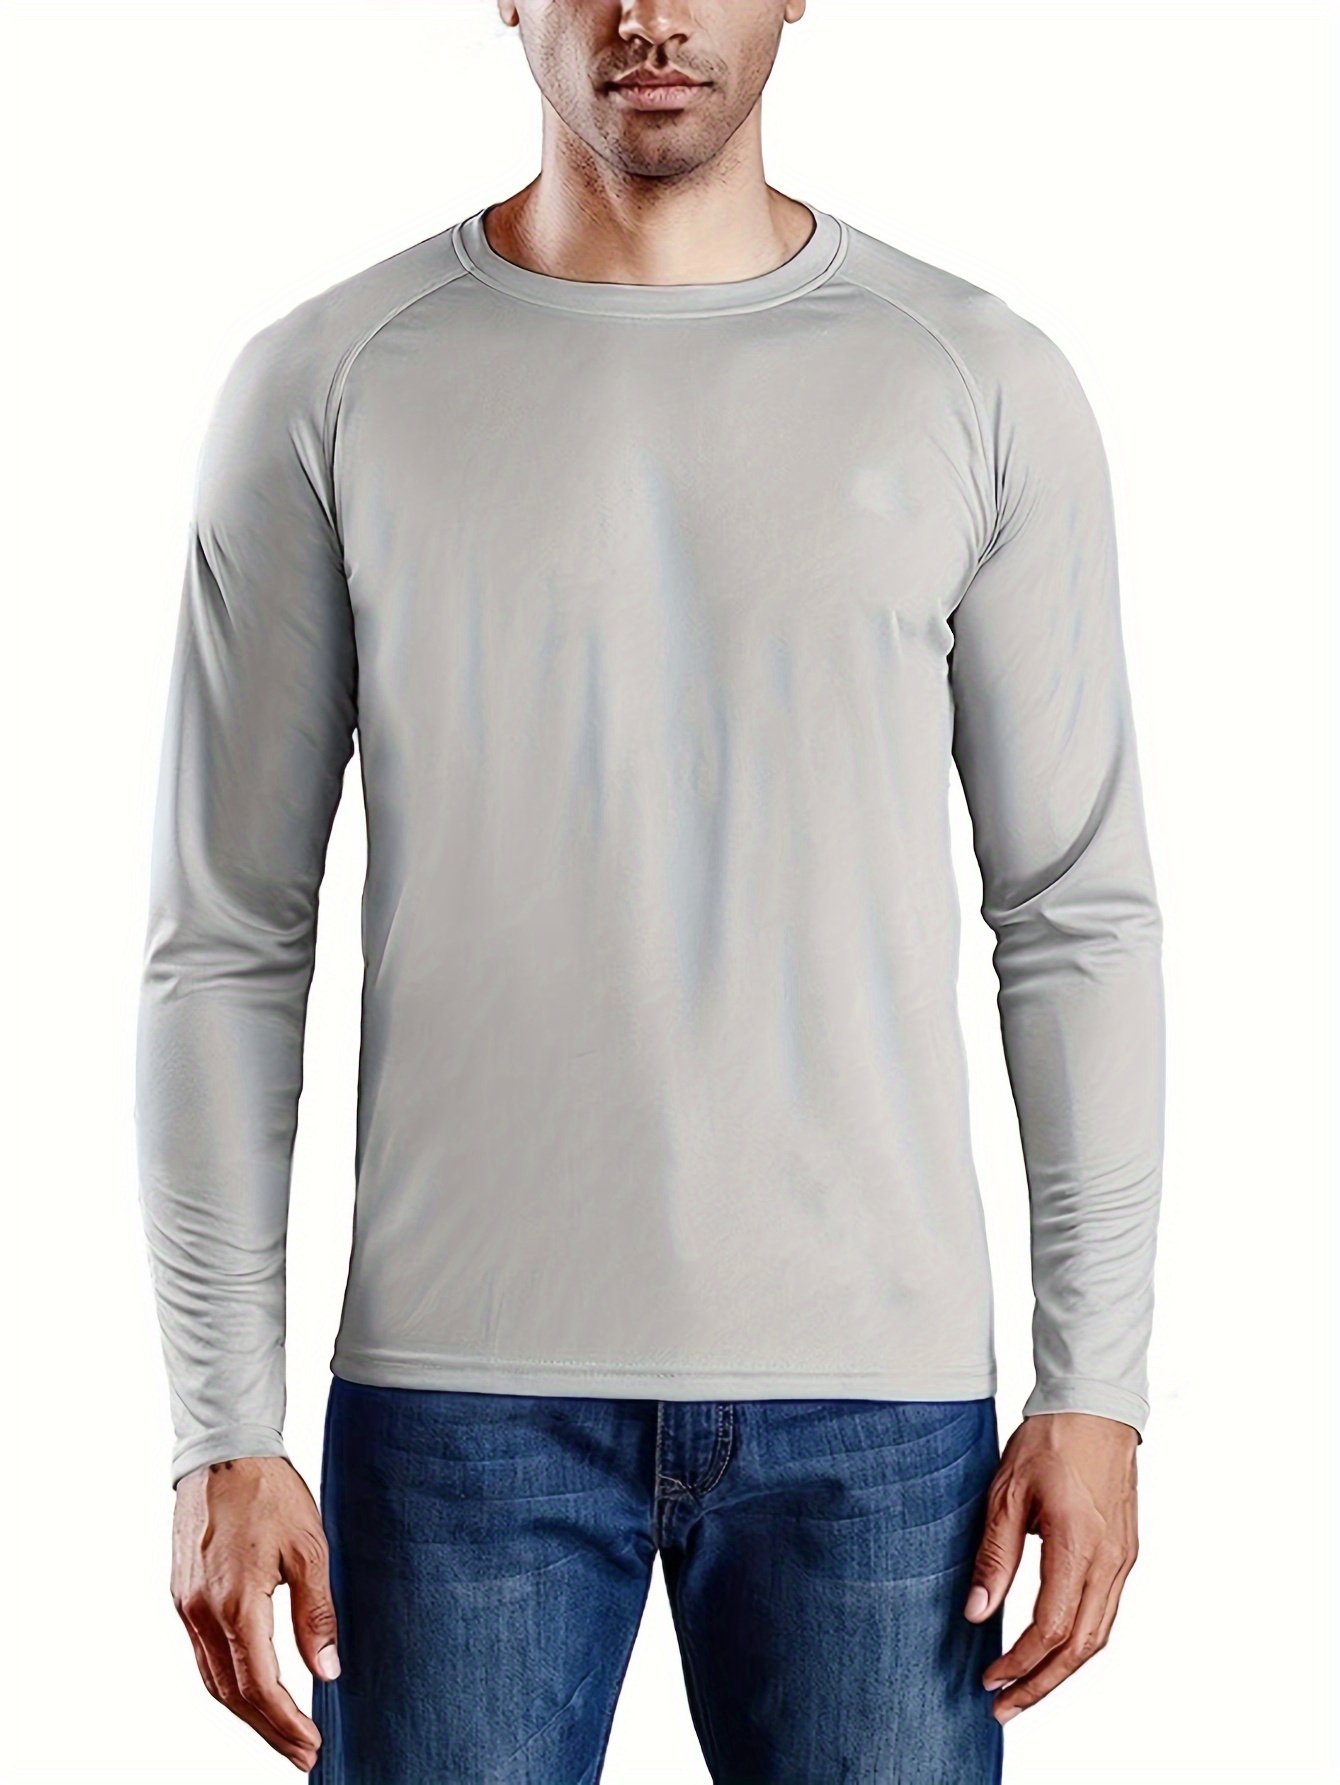 Men's UPF 50+ Sun Protection Long Sleeve T-Shirt, Comfy Quick Dry Tops for Men's Outdoor Fishing Activities,Temu